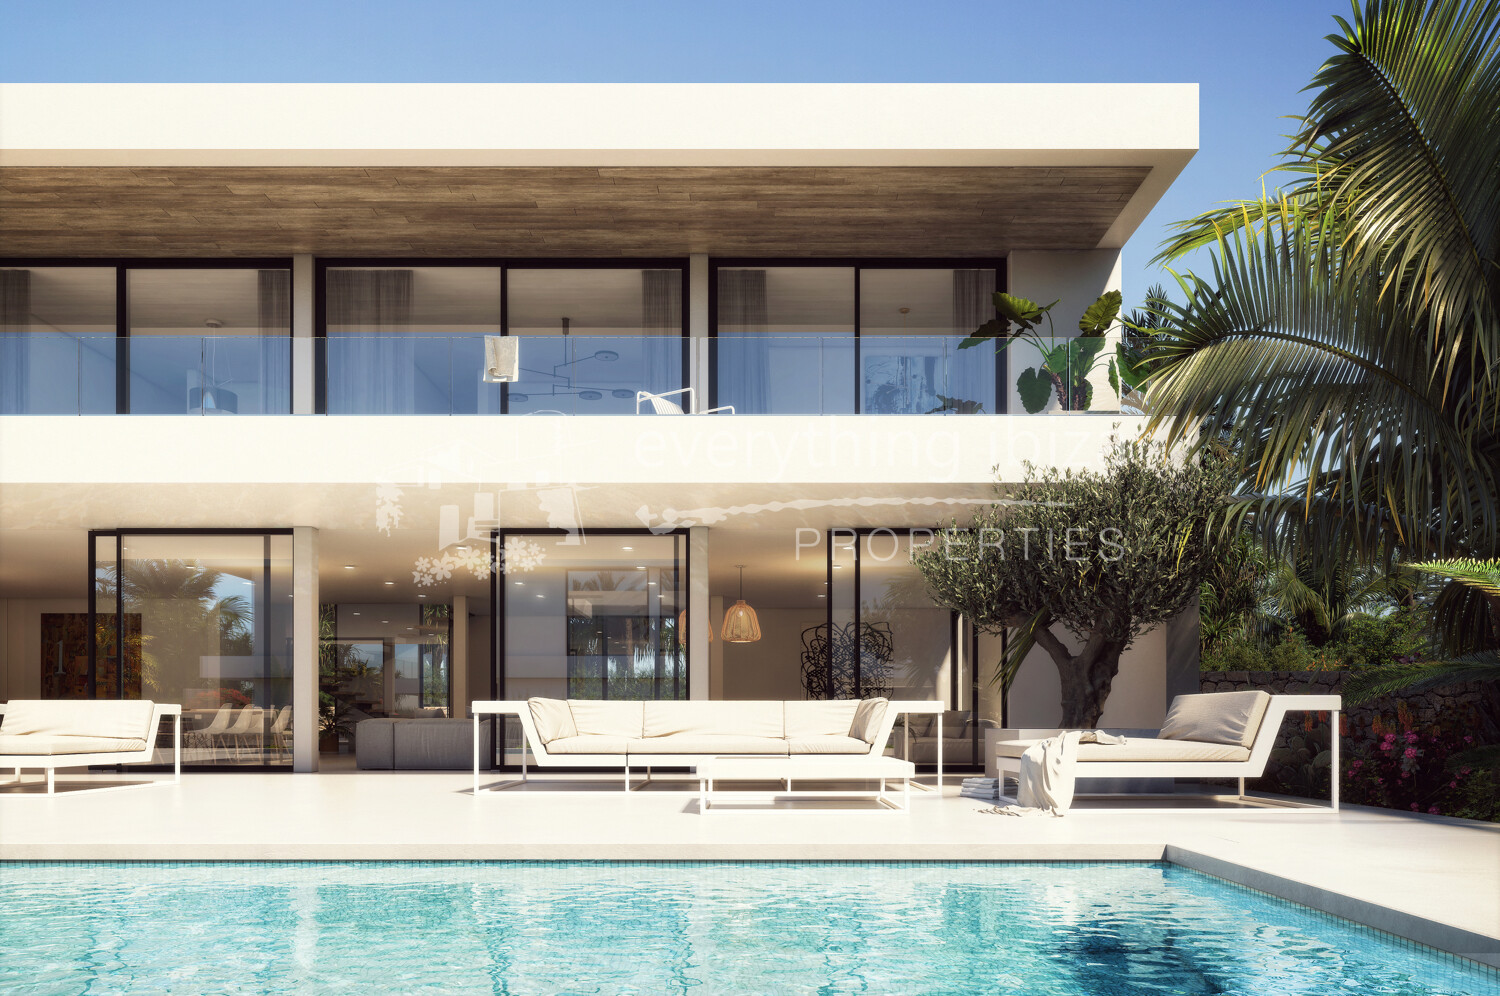 Brand New Luxury Villa in the Sought After Talamanca Area, ref. 1619, for sale in Ibiza by everything ibiza Properties